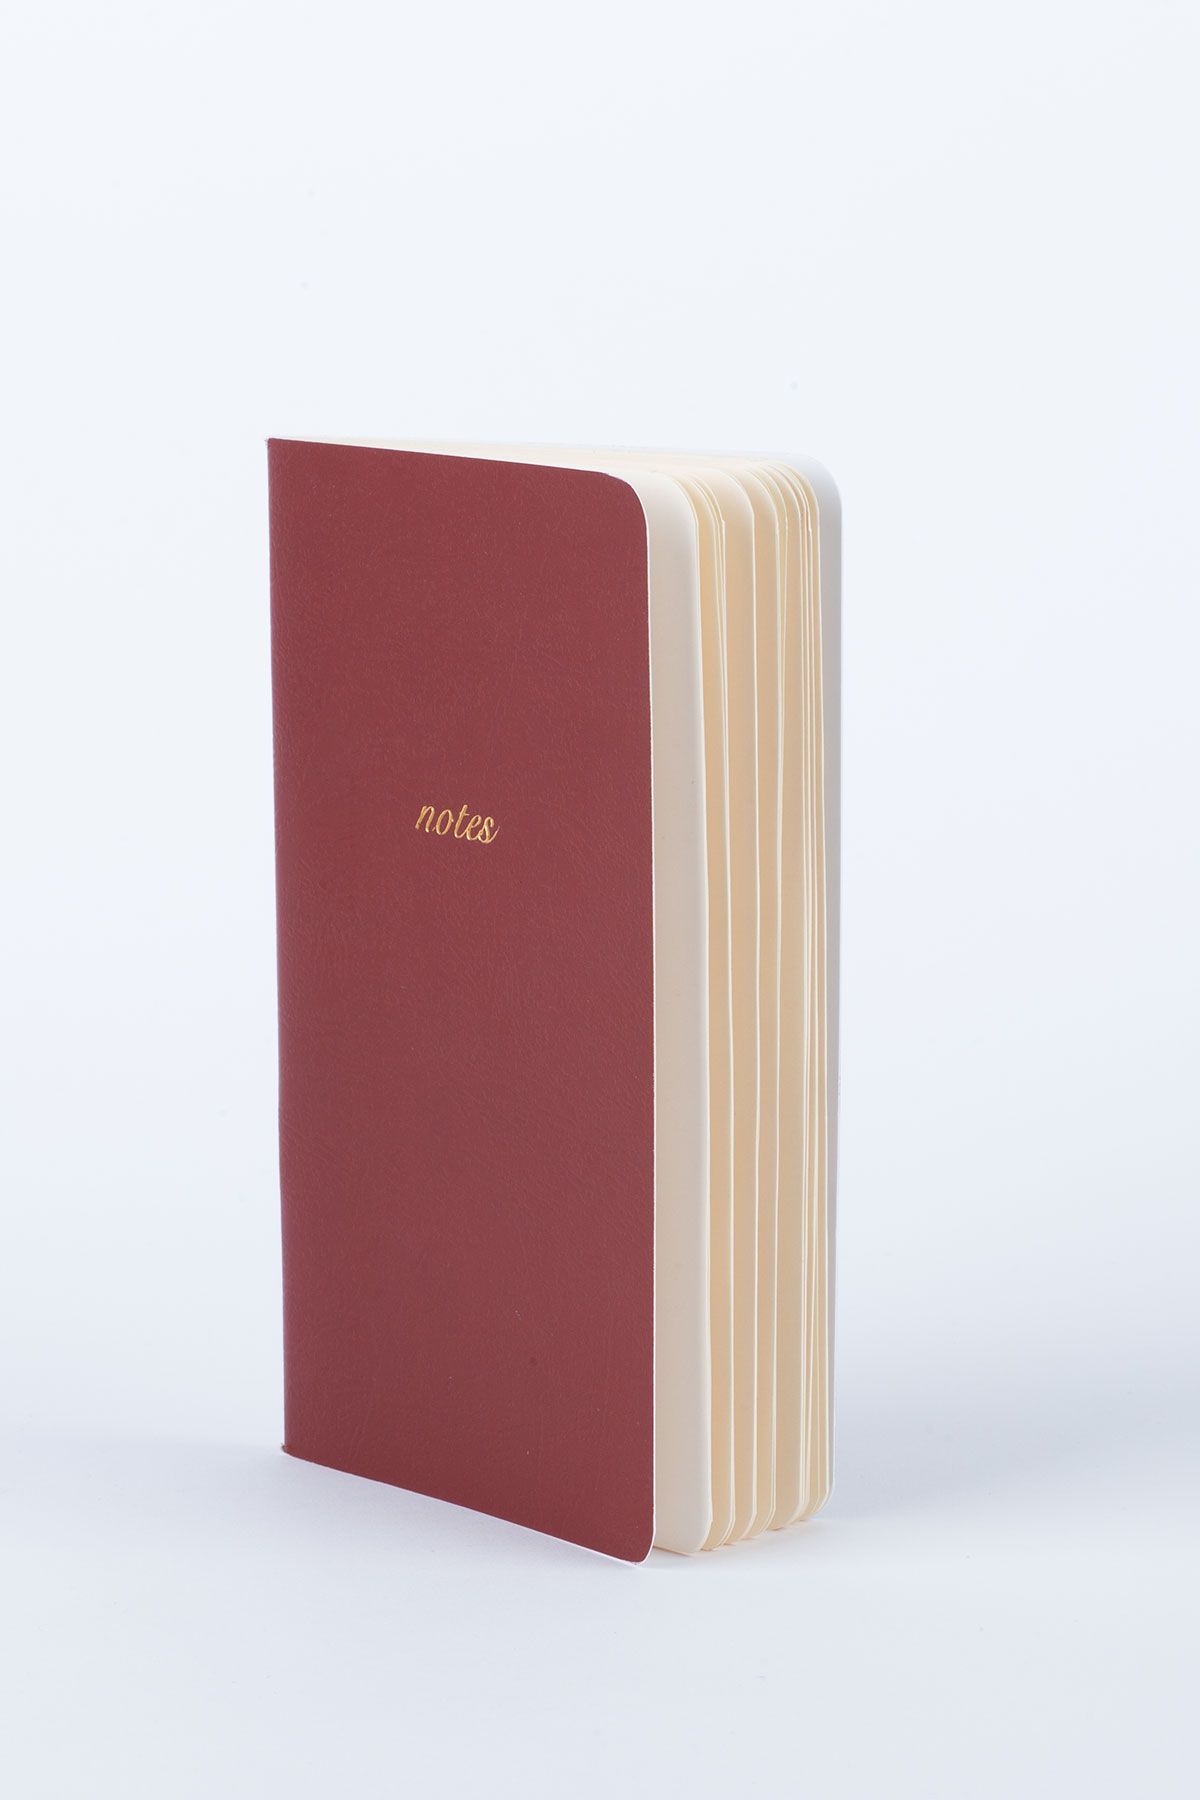 Mundo Shop Notes Defter - New Year Red